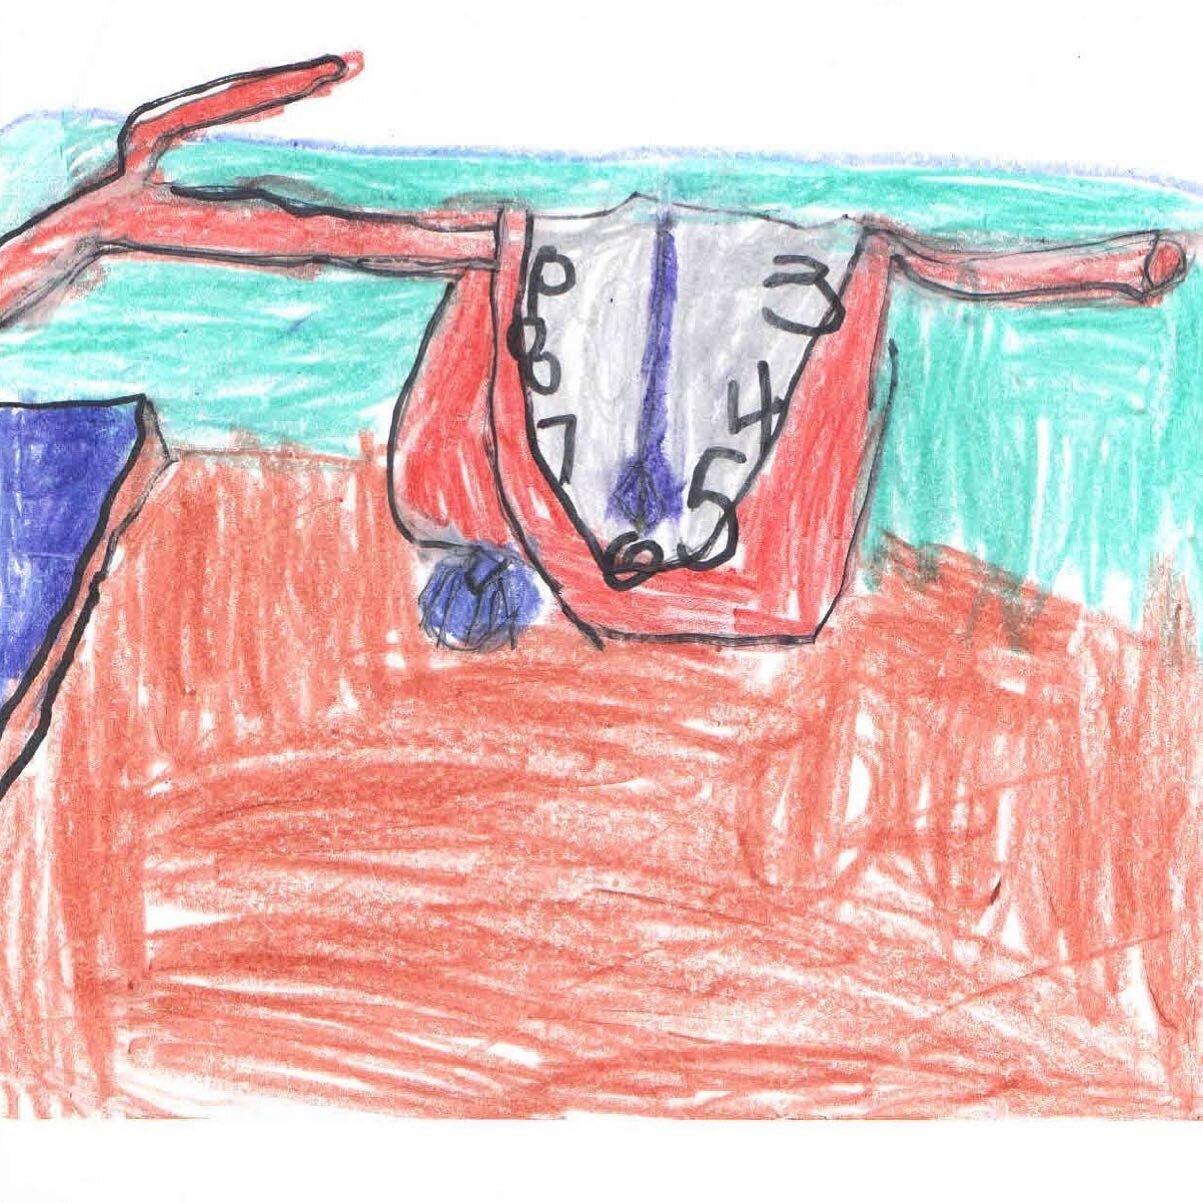 It's that &quot;time&quot; of year again&mdash;happy #nationalcoloringday! Check out this #SalvadorDali inspired drawing of a melting clock by an E-I-E-I-Art fan! ⏰